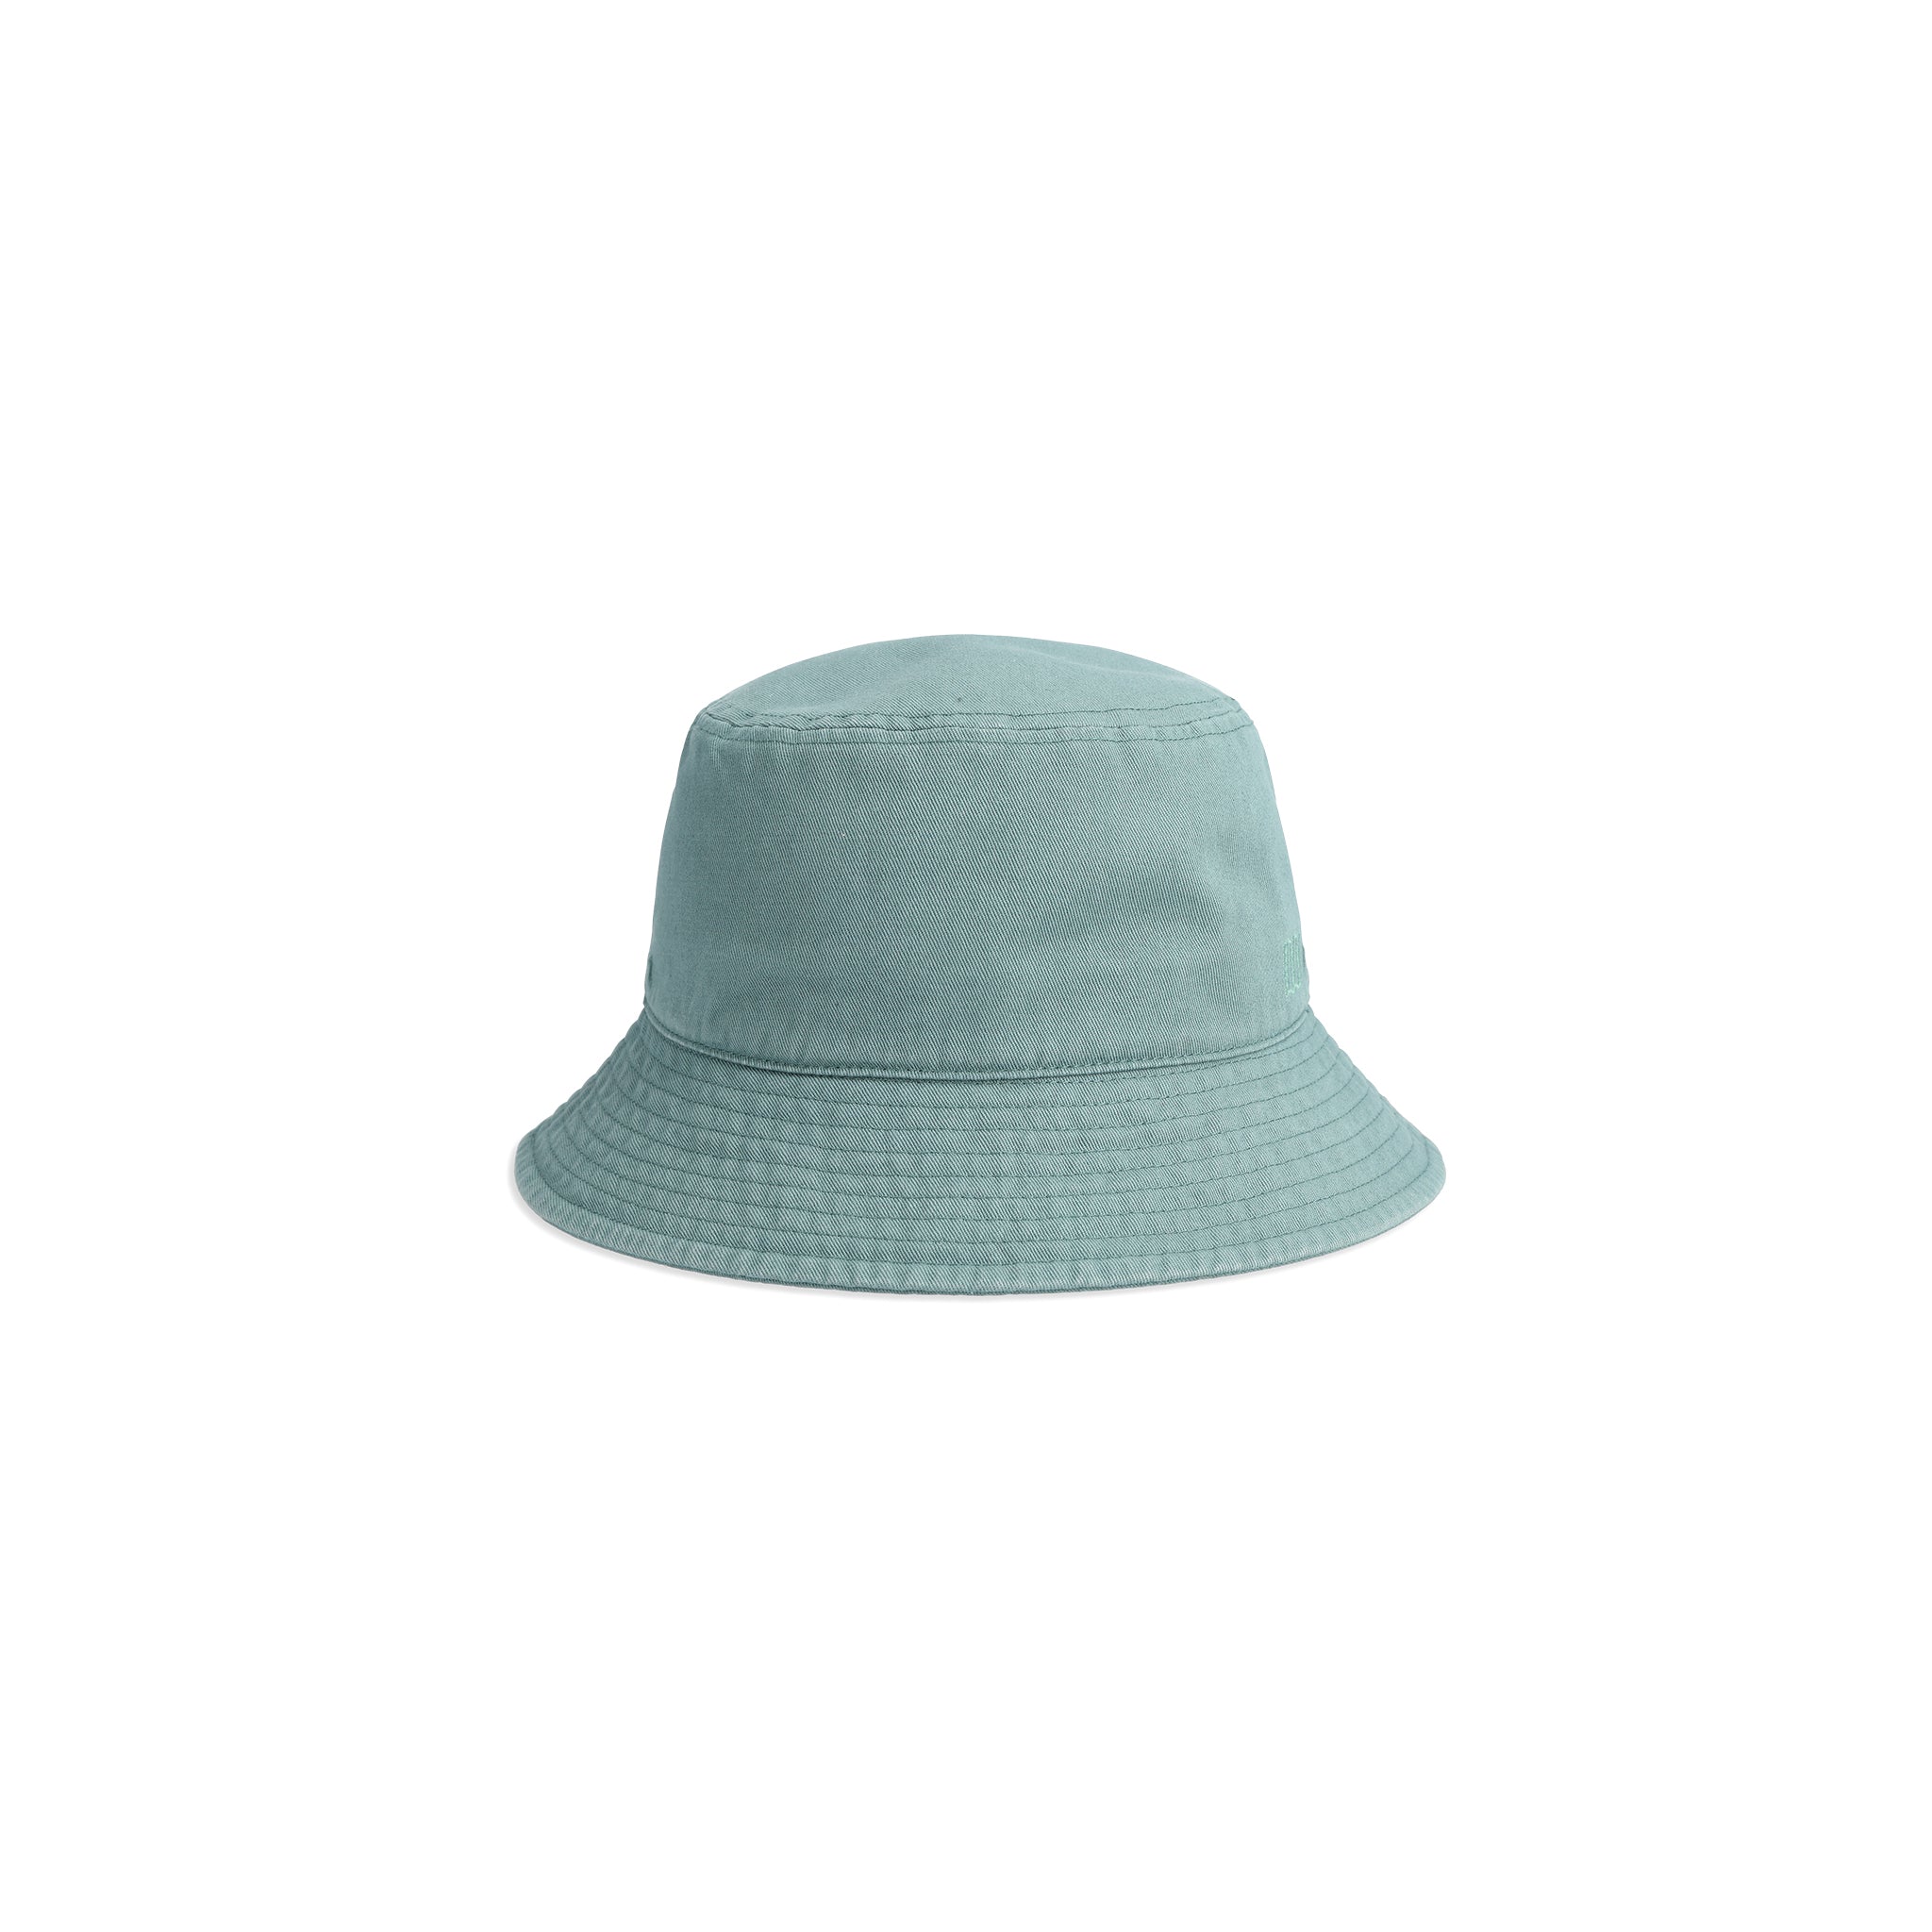 Back View of Topo Designs Dirt Bucket Hat in "Sea Pine"